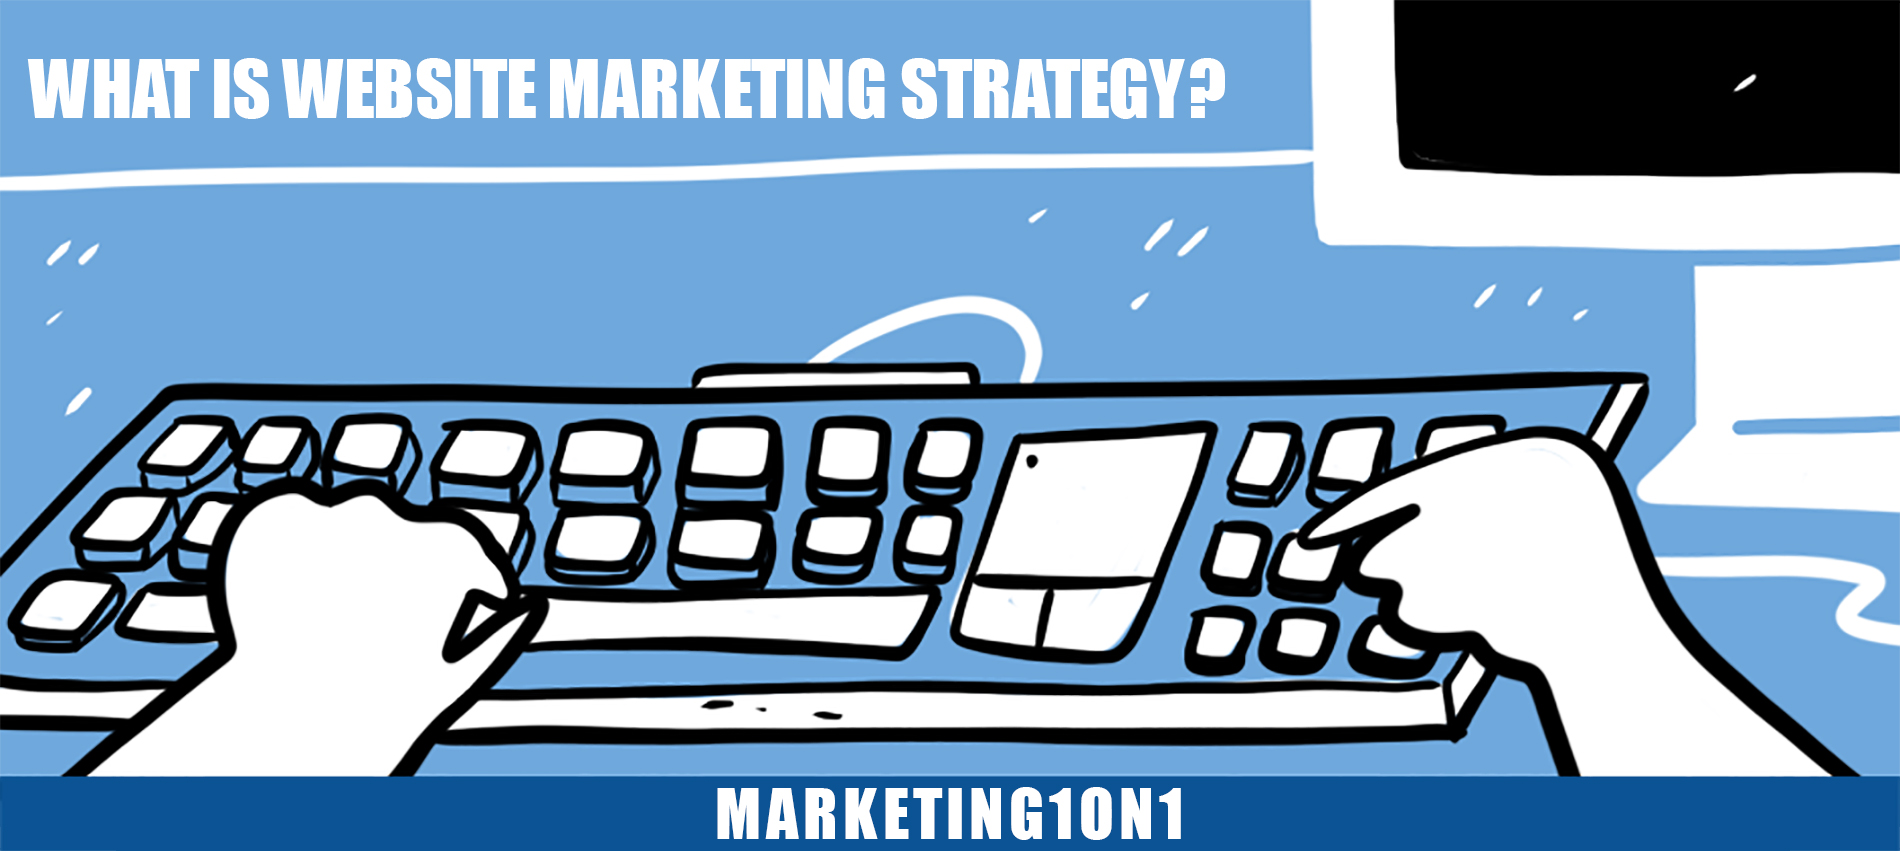 What is website marketing strategy?